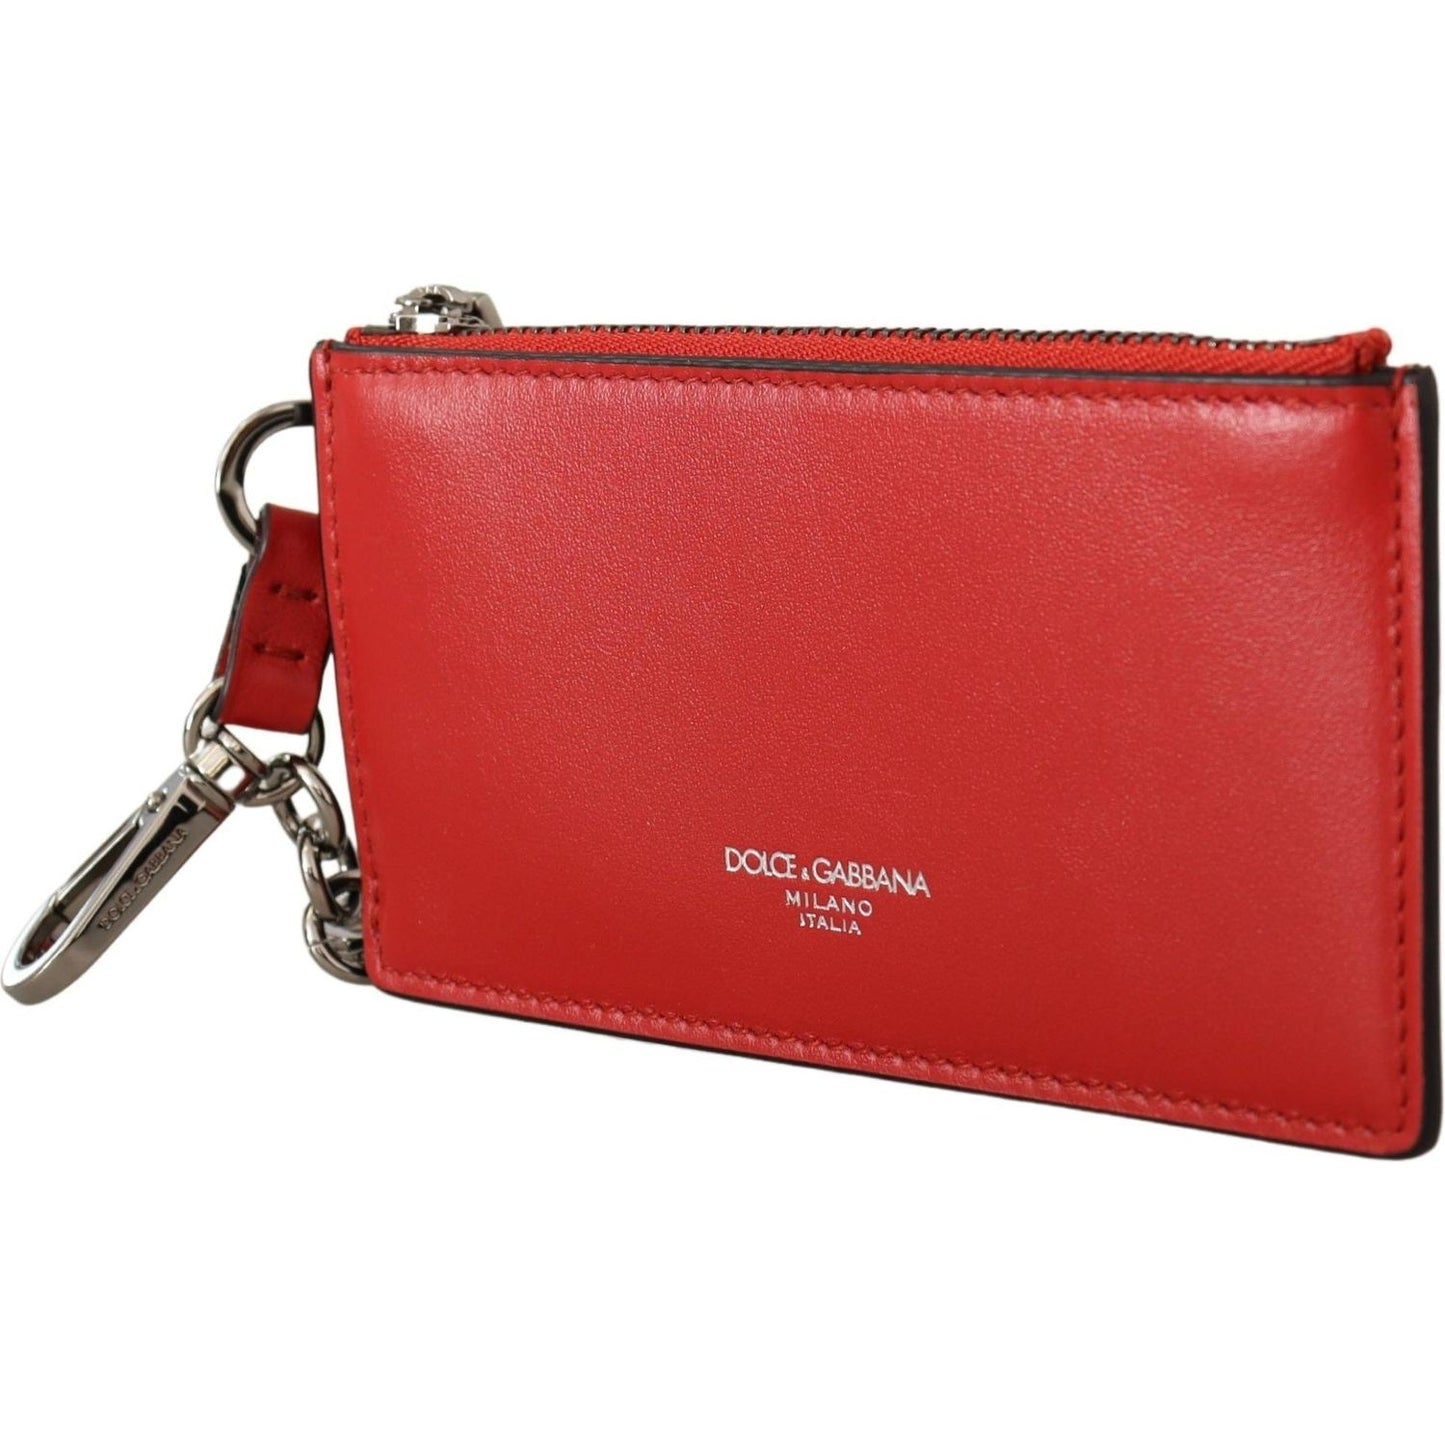 Dolce & Gabbana Elegant Leather Keychain in Vibrant Red red-leather-purse-silver-tone-keychain IMG_7533-1ffe2e52-635.jpg